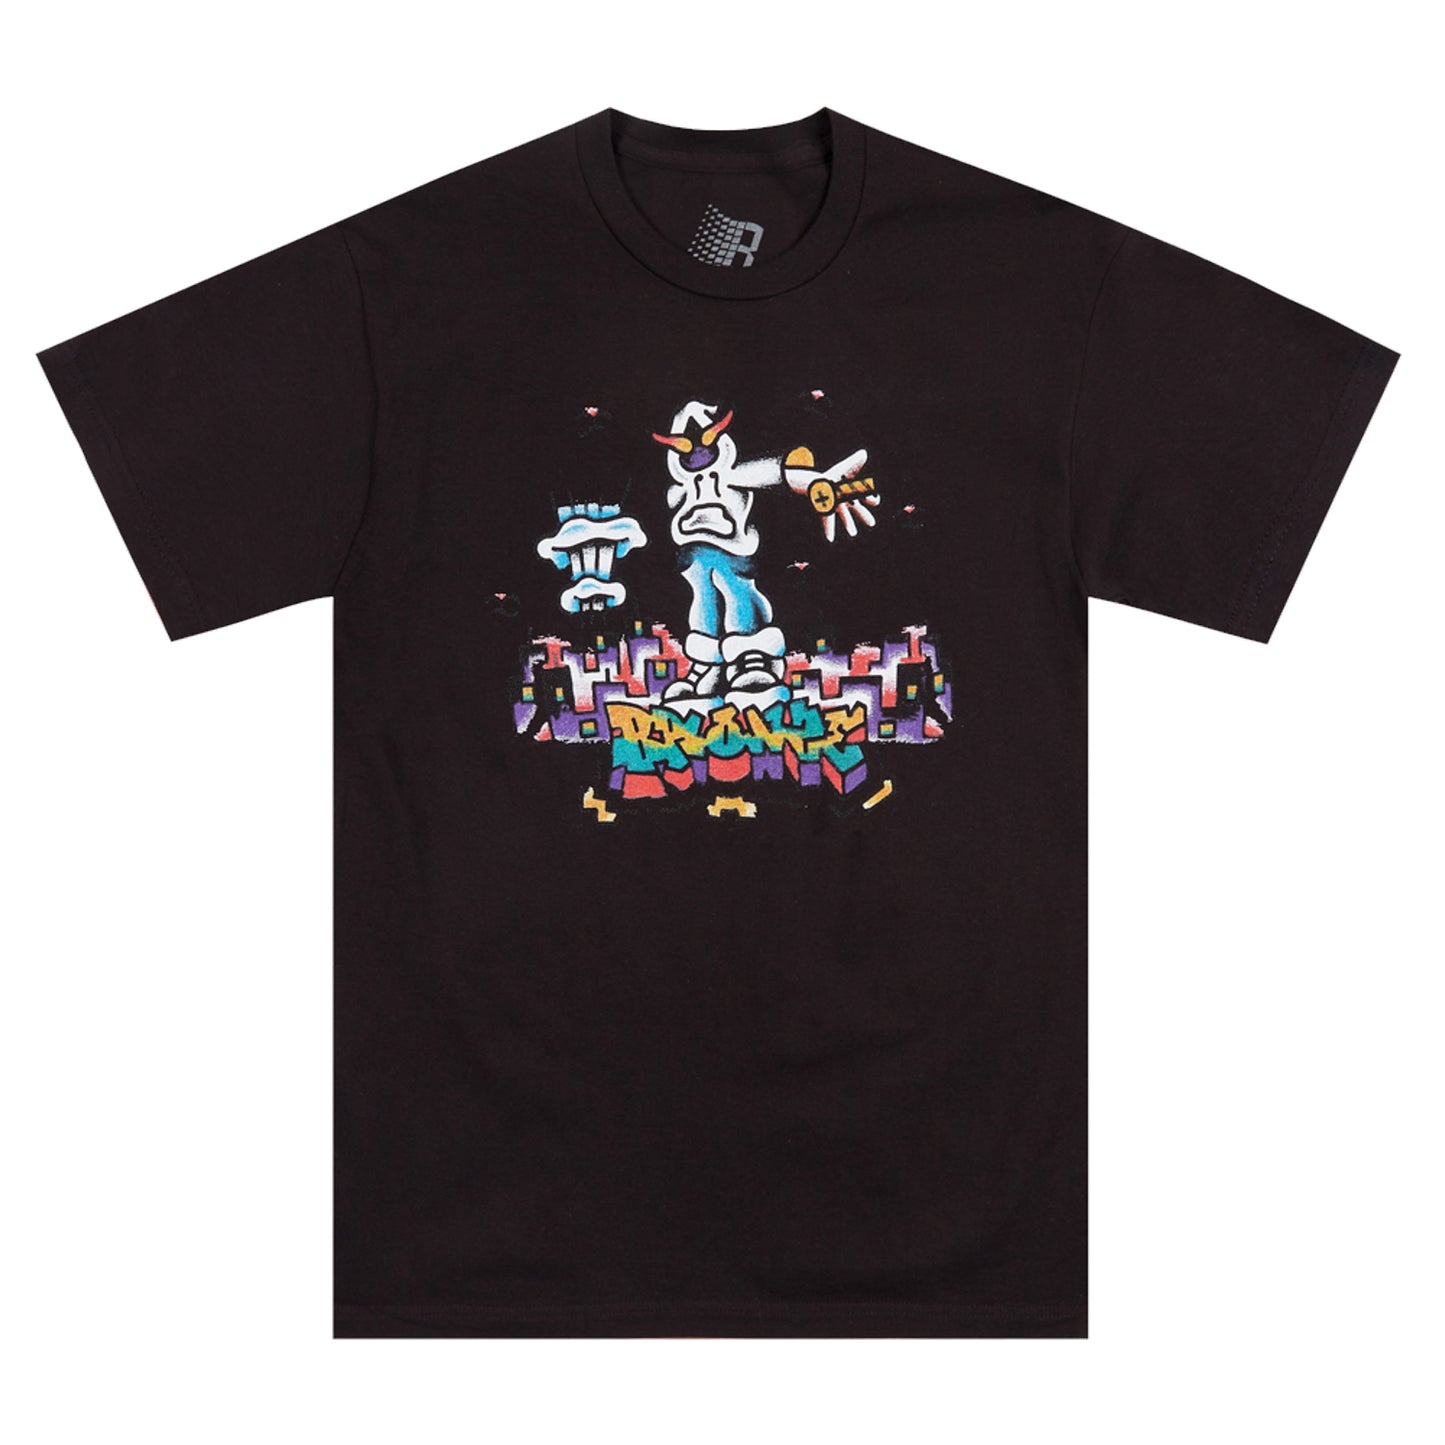 Significant Other Tee - Black